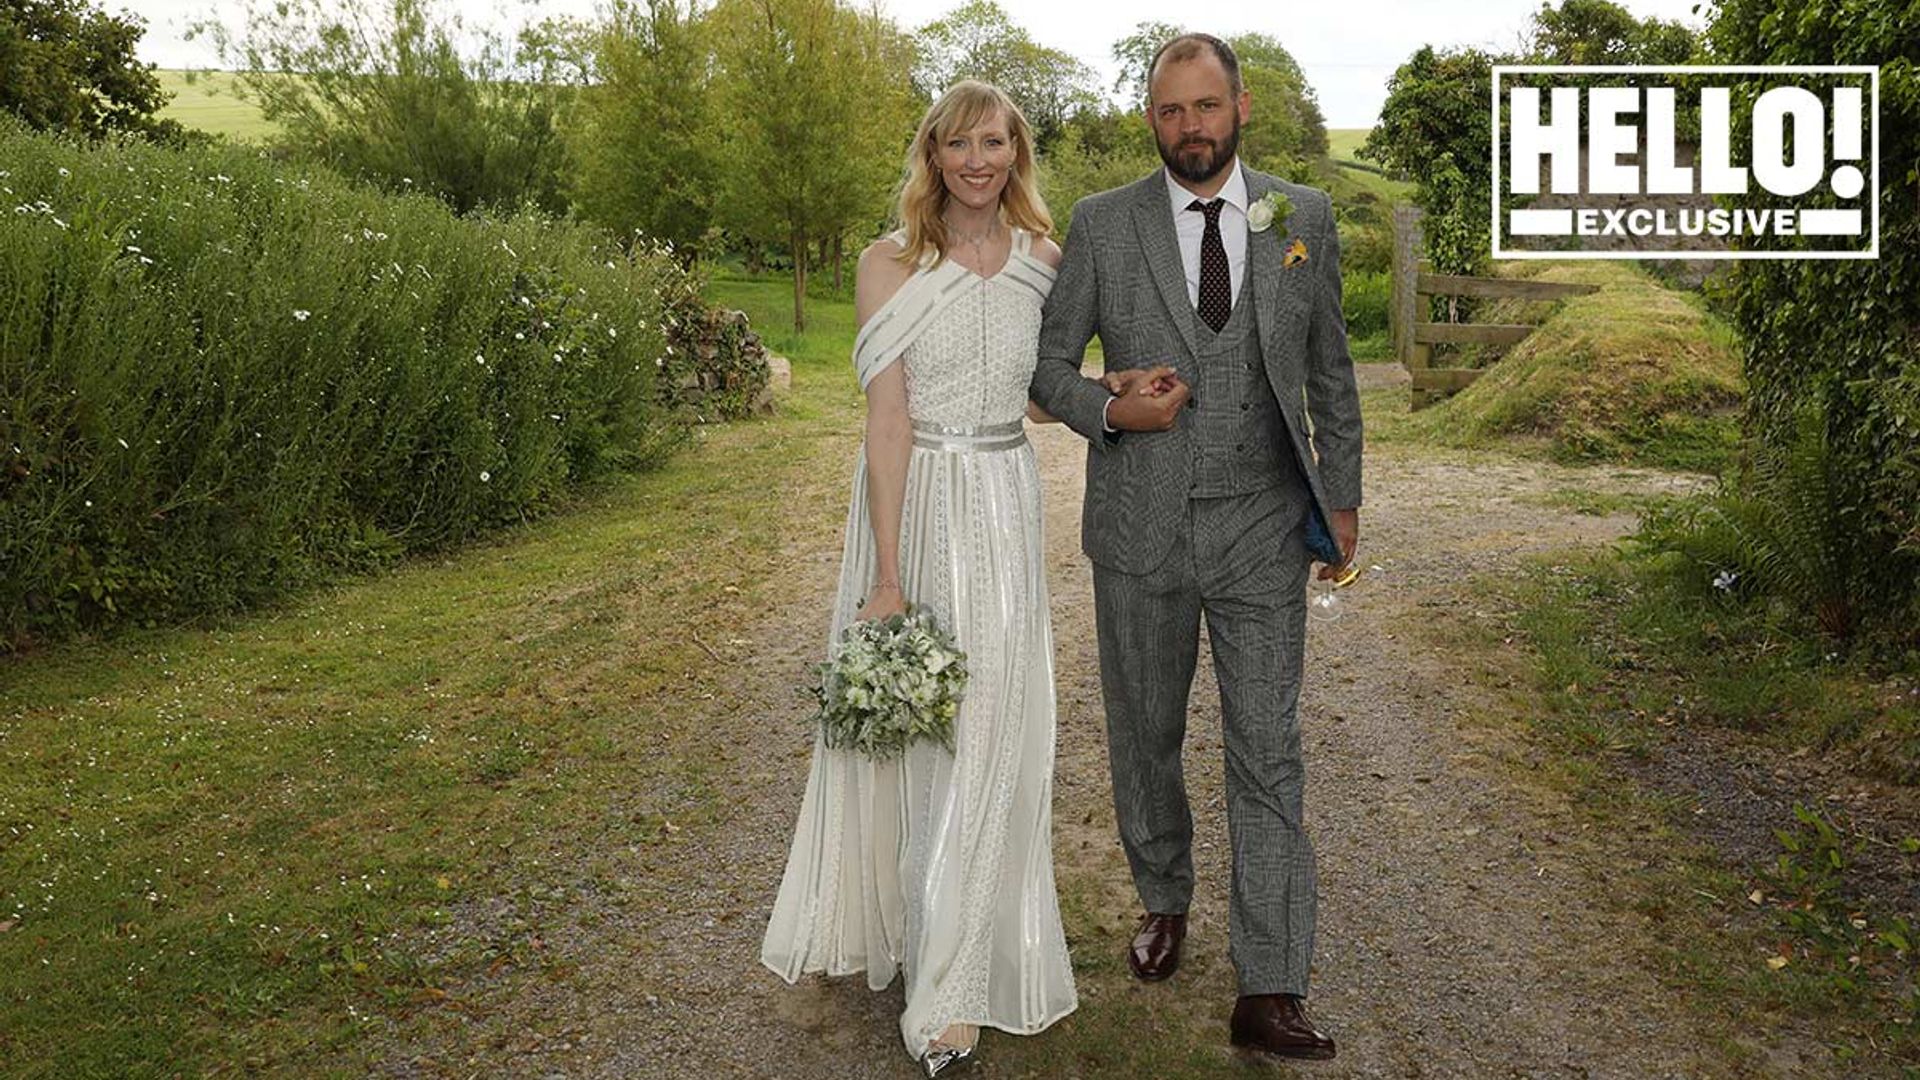 Exclusive: Jade Parfitt marries Jack Dyson in star-studded country wedding